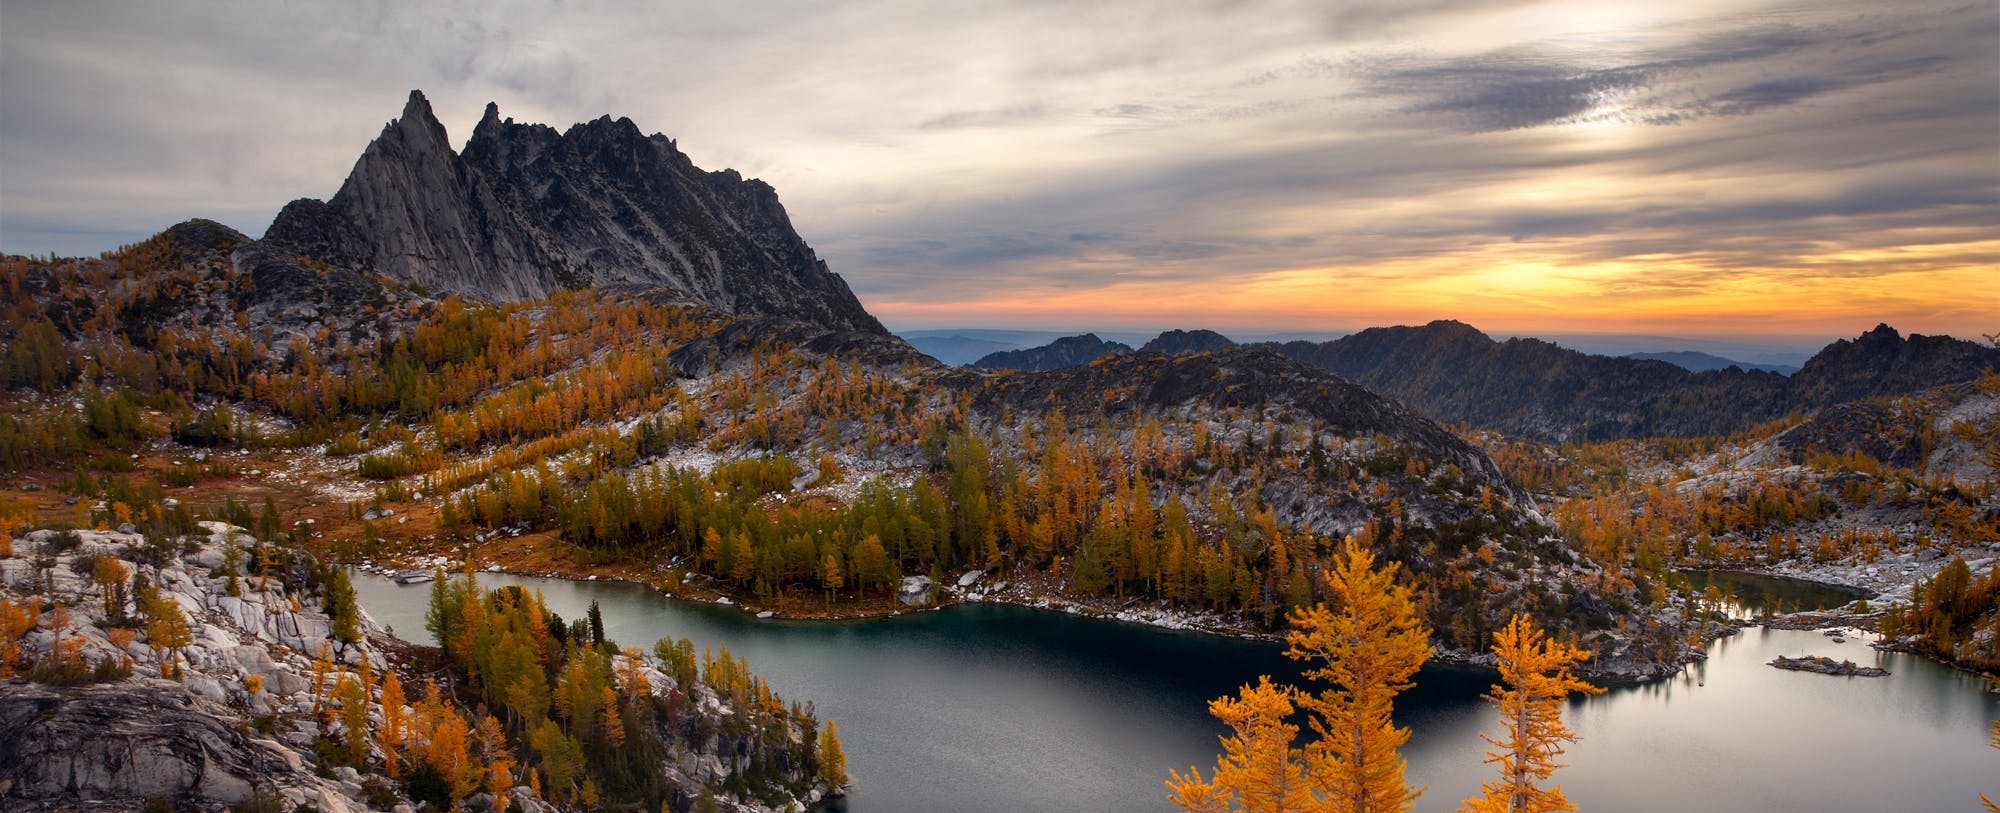 Best Hikes and Drives in the U.S. for Fall Foliage